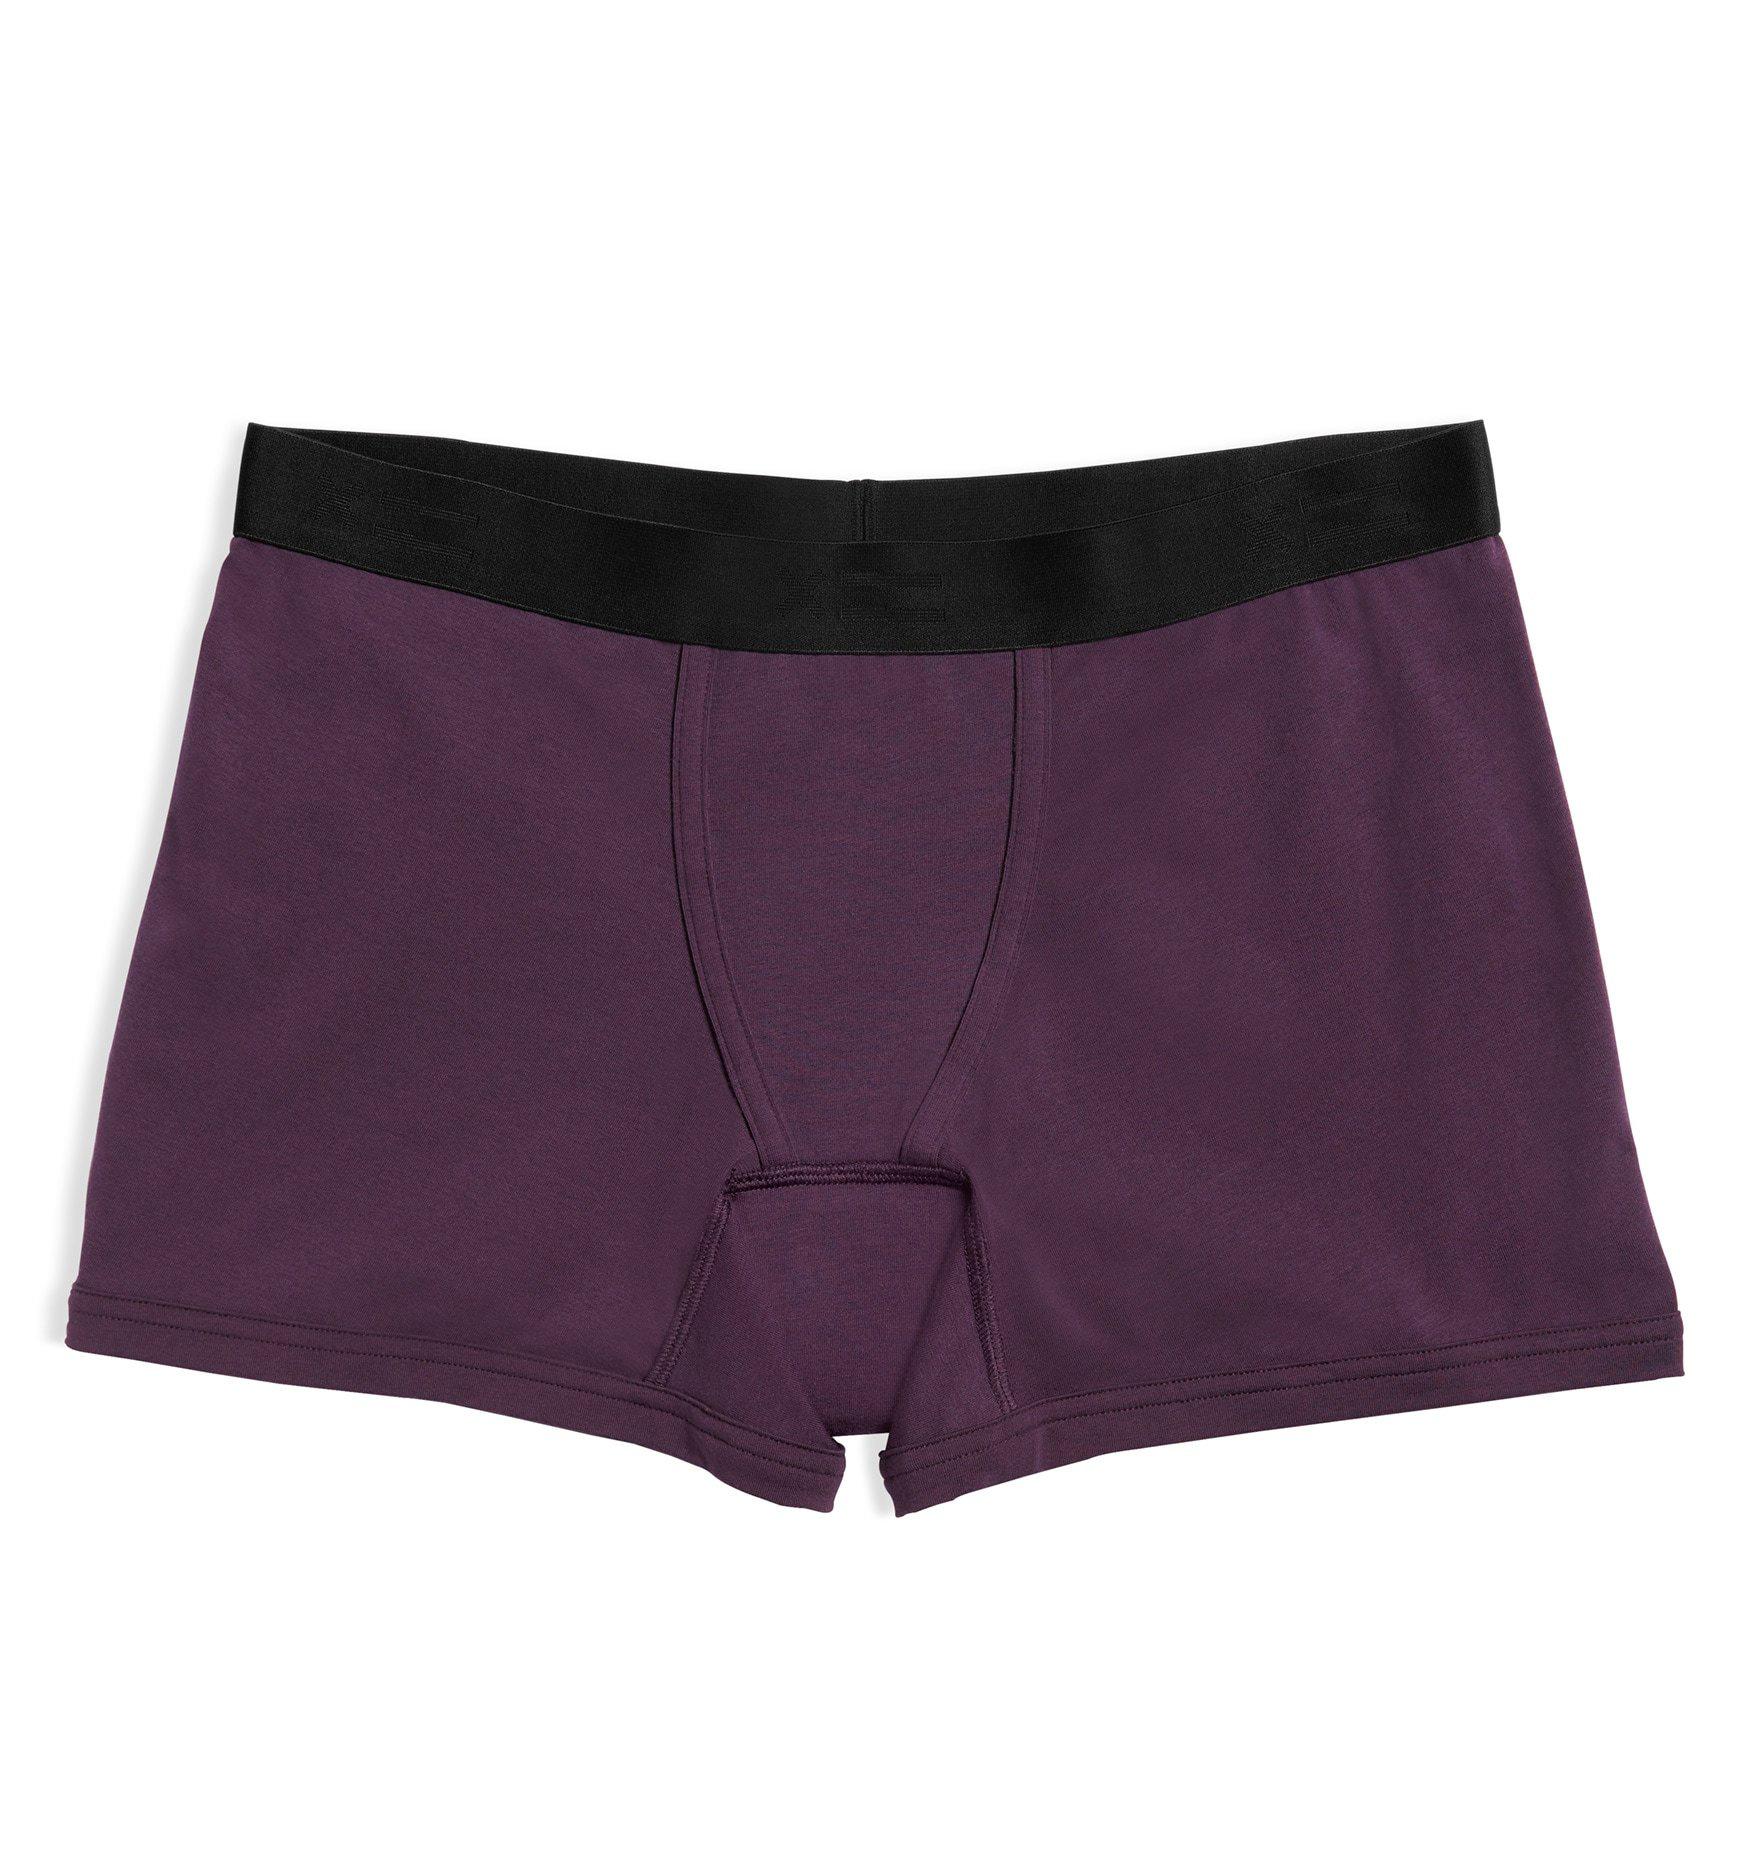 First Line Leakproof 4.5" Trunks - Plum X=